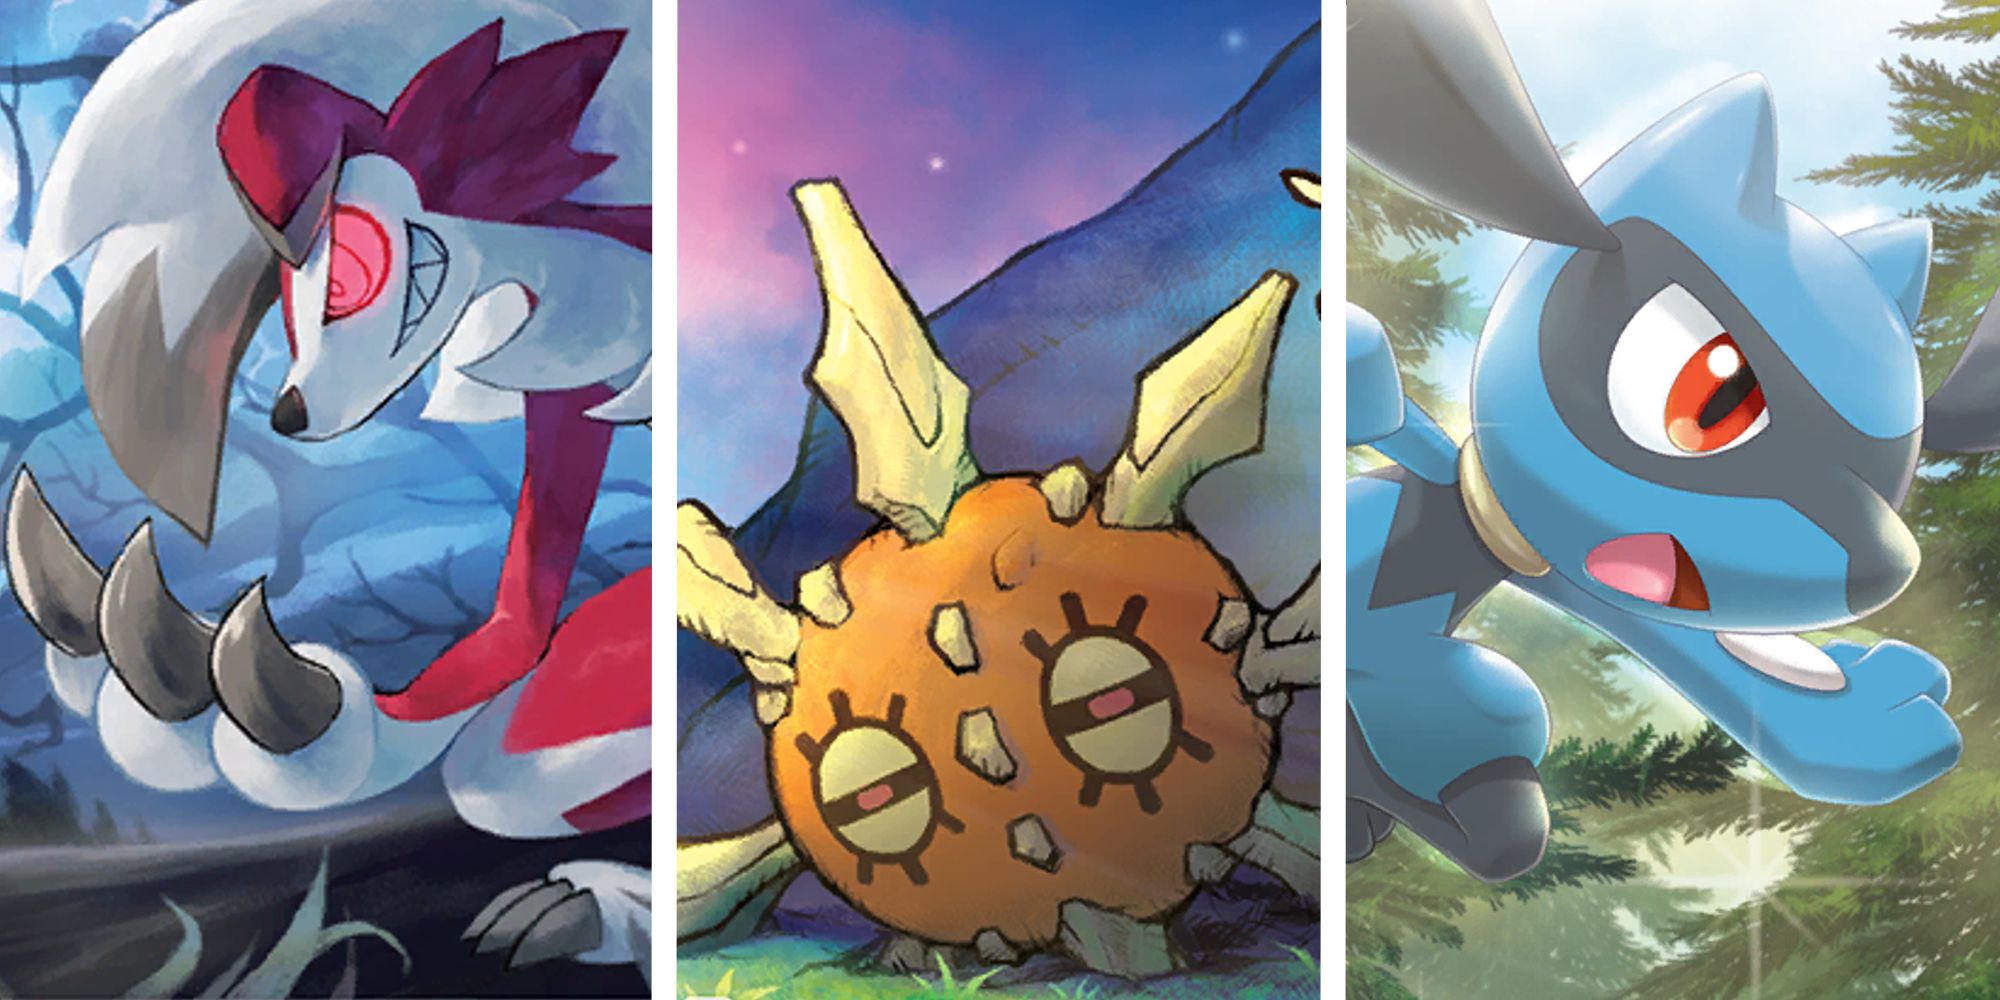 Featured Image showing Riolu, Lycanrock, and Solrock